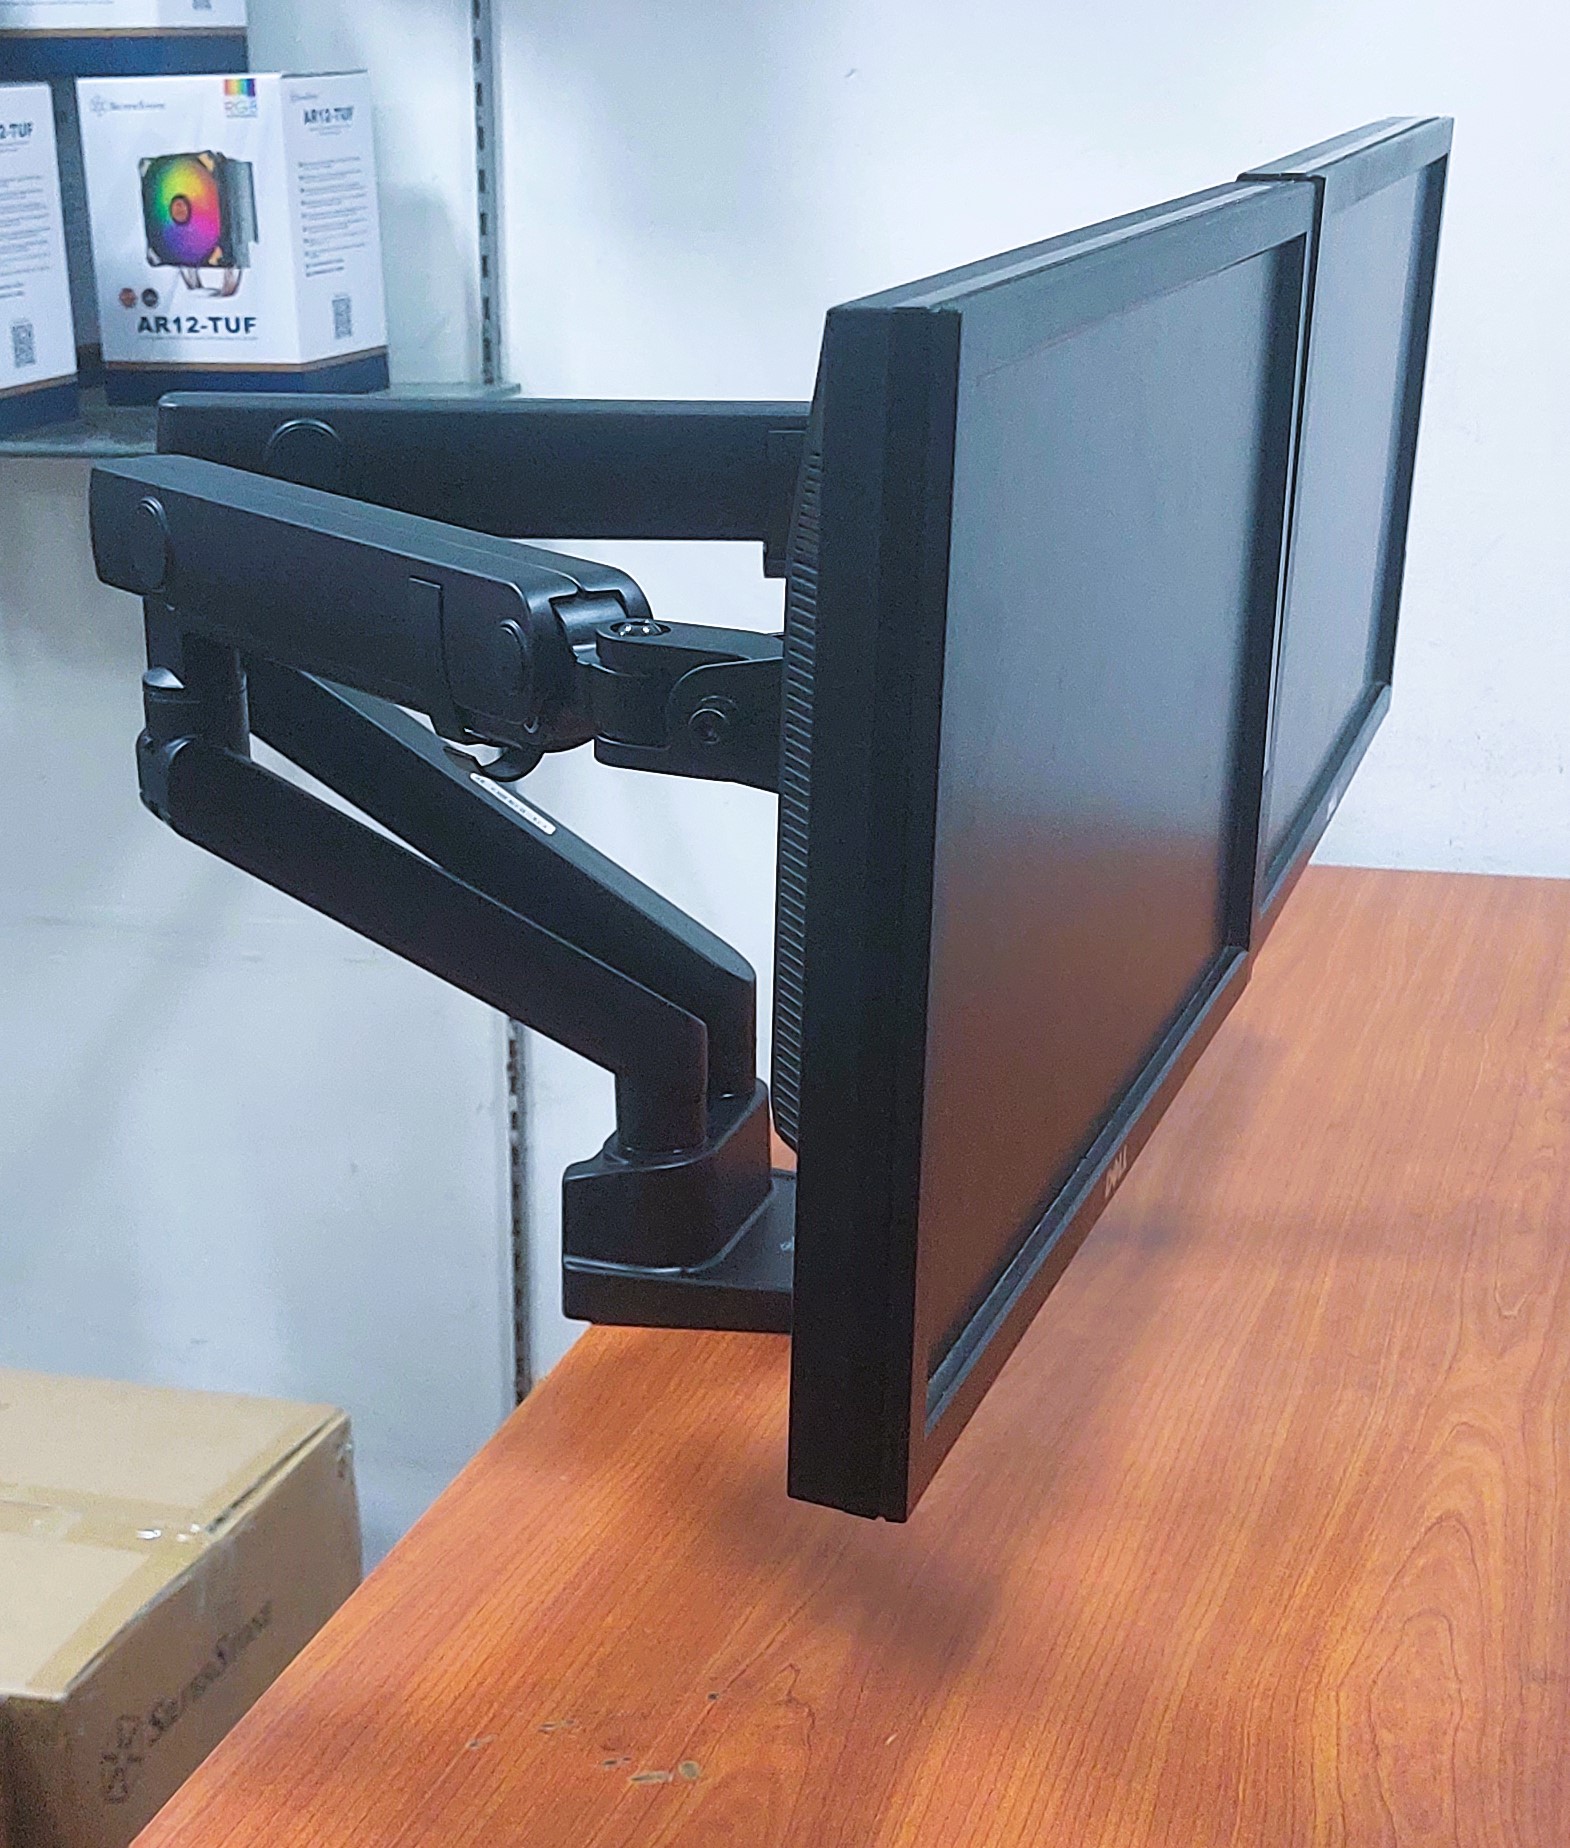 SilverStone DUAL MONITOR ARM25. MECHANICAL SPRING DESIGN AND VERSATILE ADJUSTABILITY